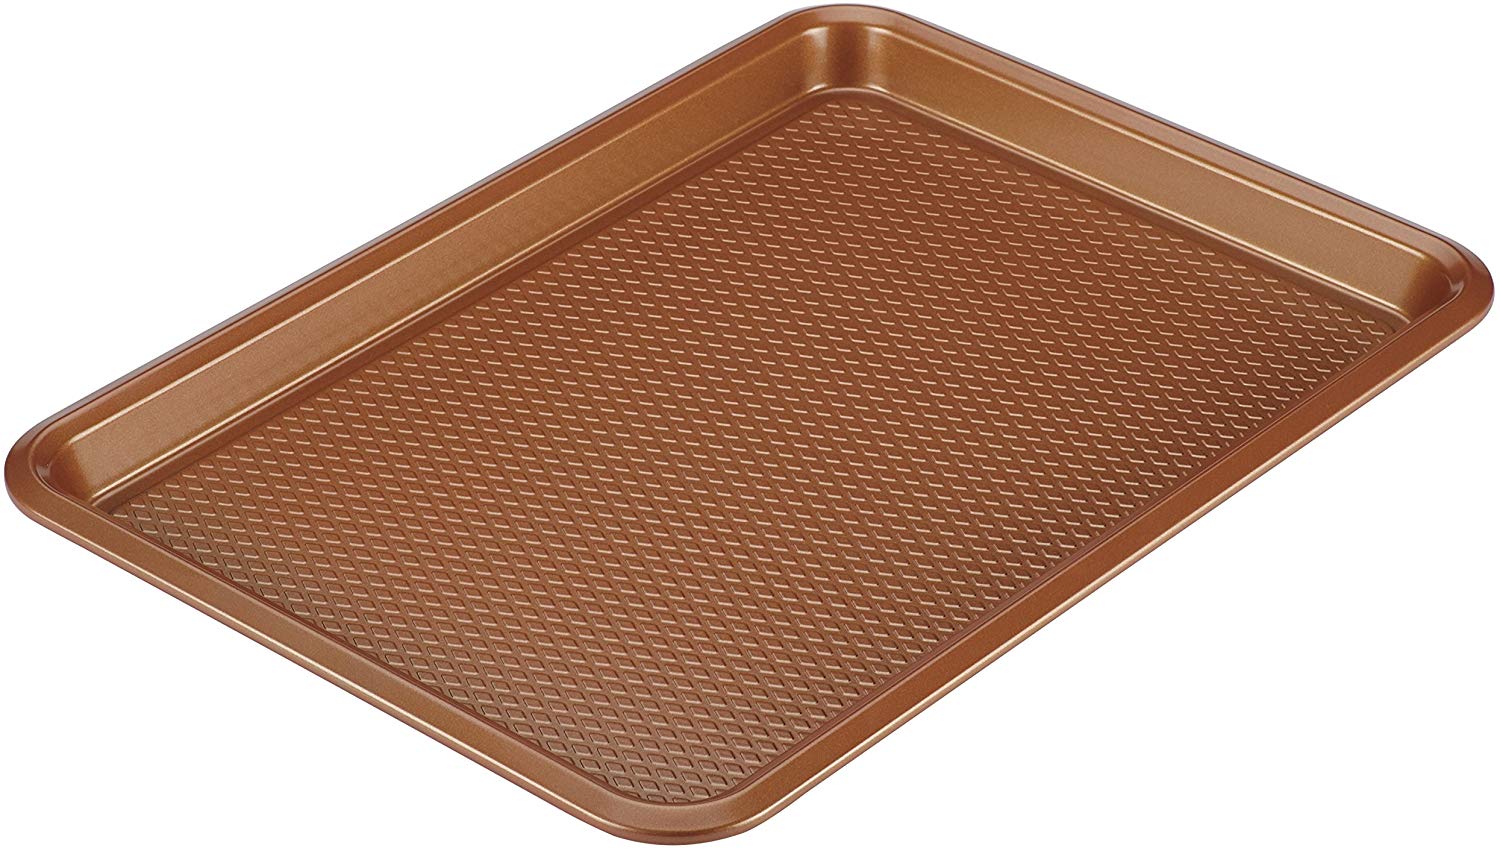  Mrs. Anderson's Baking Jelly Roll Pan, 10.25-Inches x